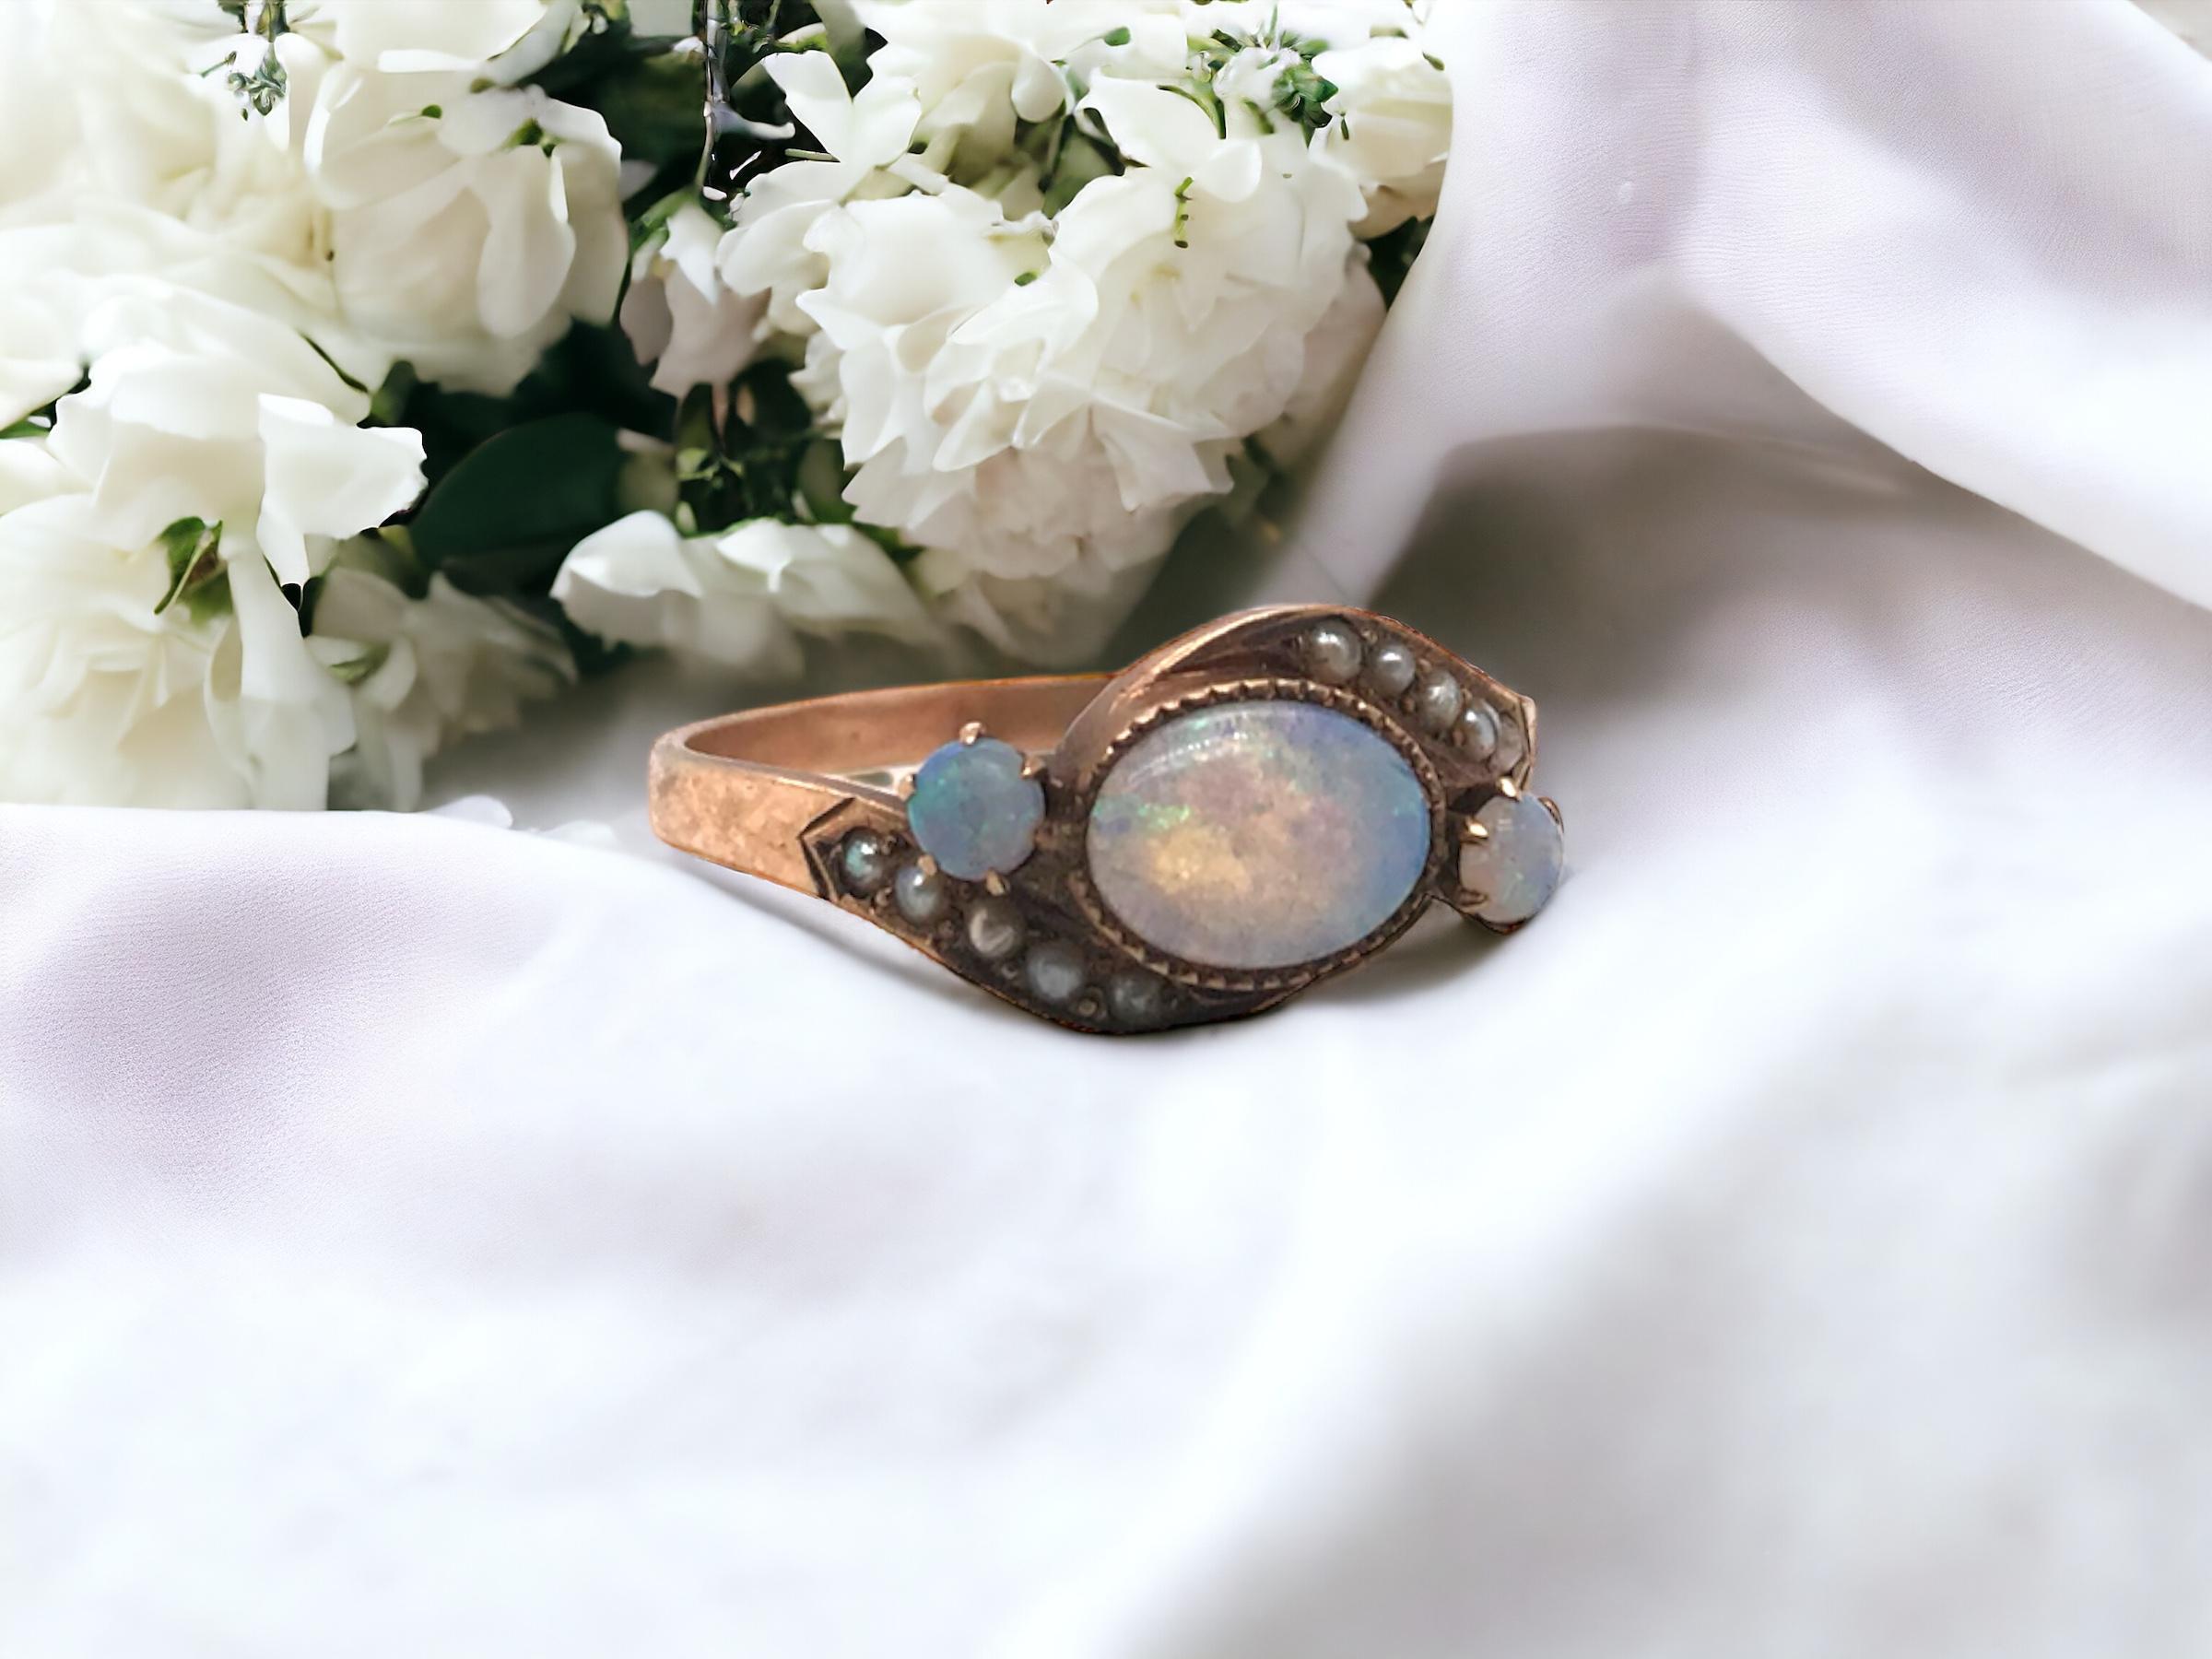 We love the design of this vintage beauty!

Ring Details
Material: 10K Rose Gold
Era: Victorian 1840 - 1900
Ring Width: 8.1mm
Shank Width: 2.0mm
Weight: 2.3 Grams
Finger Size: 8 1/2
Sizing Available 

Item: V71KM2-G